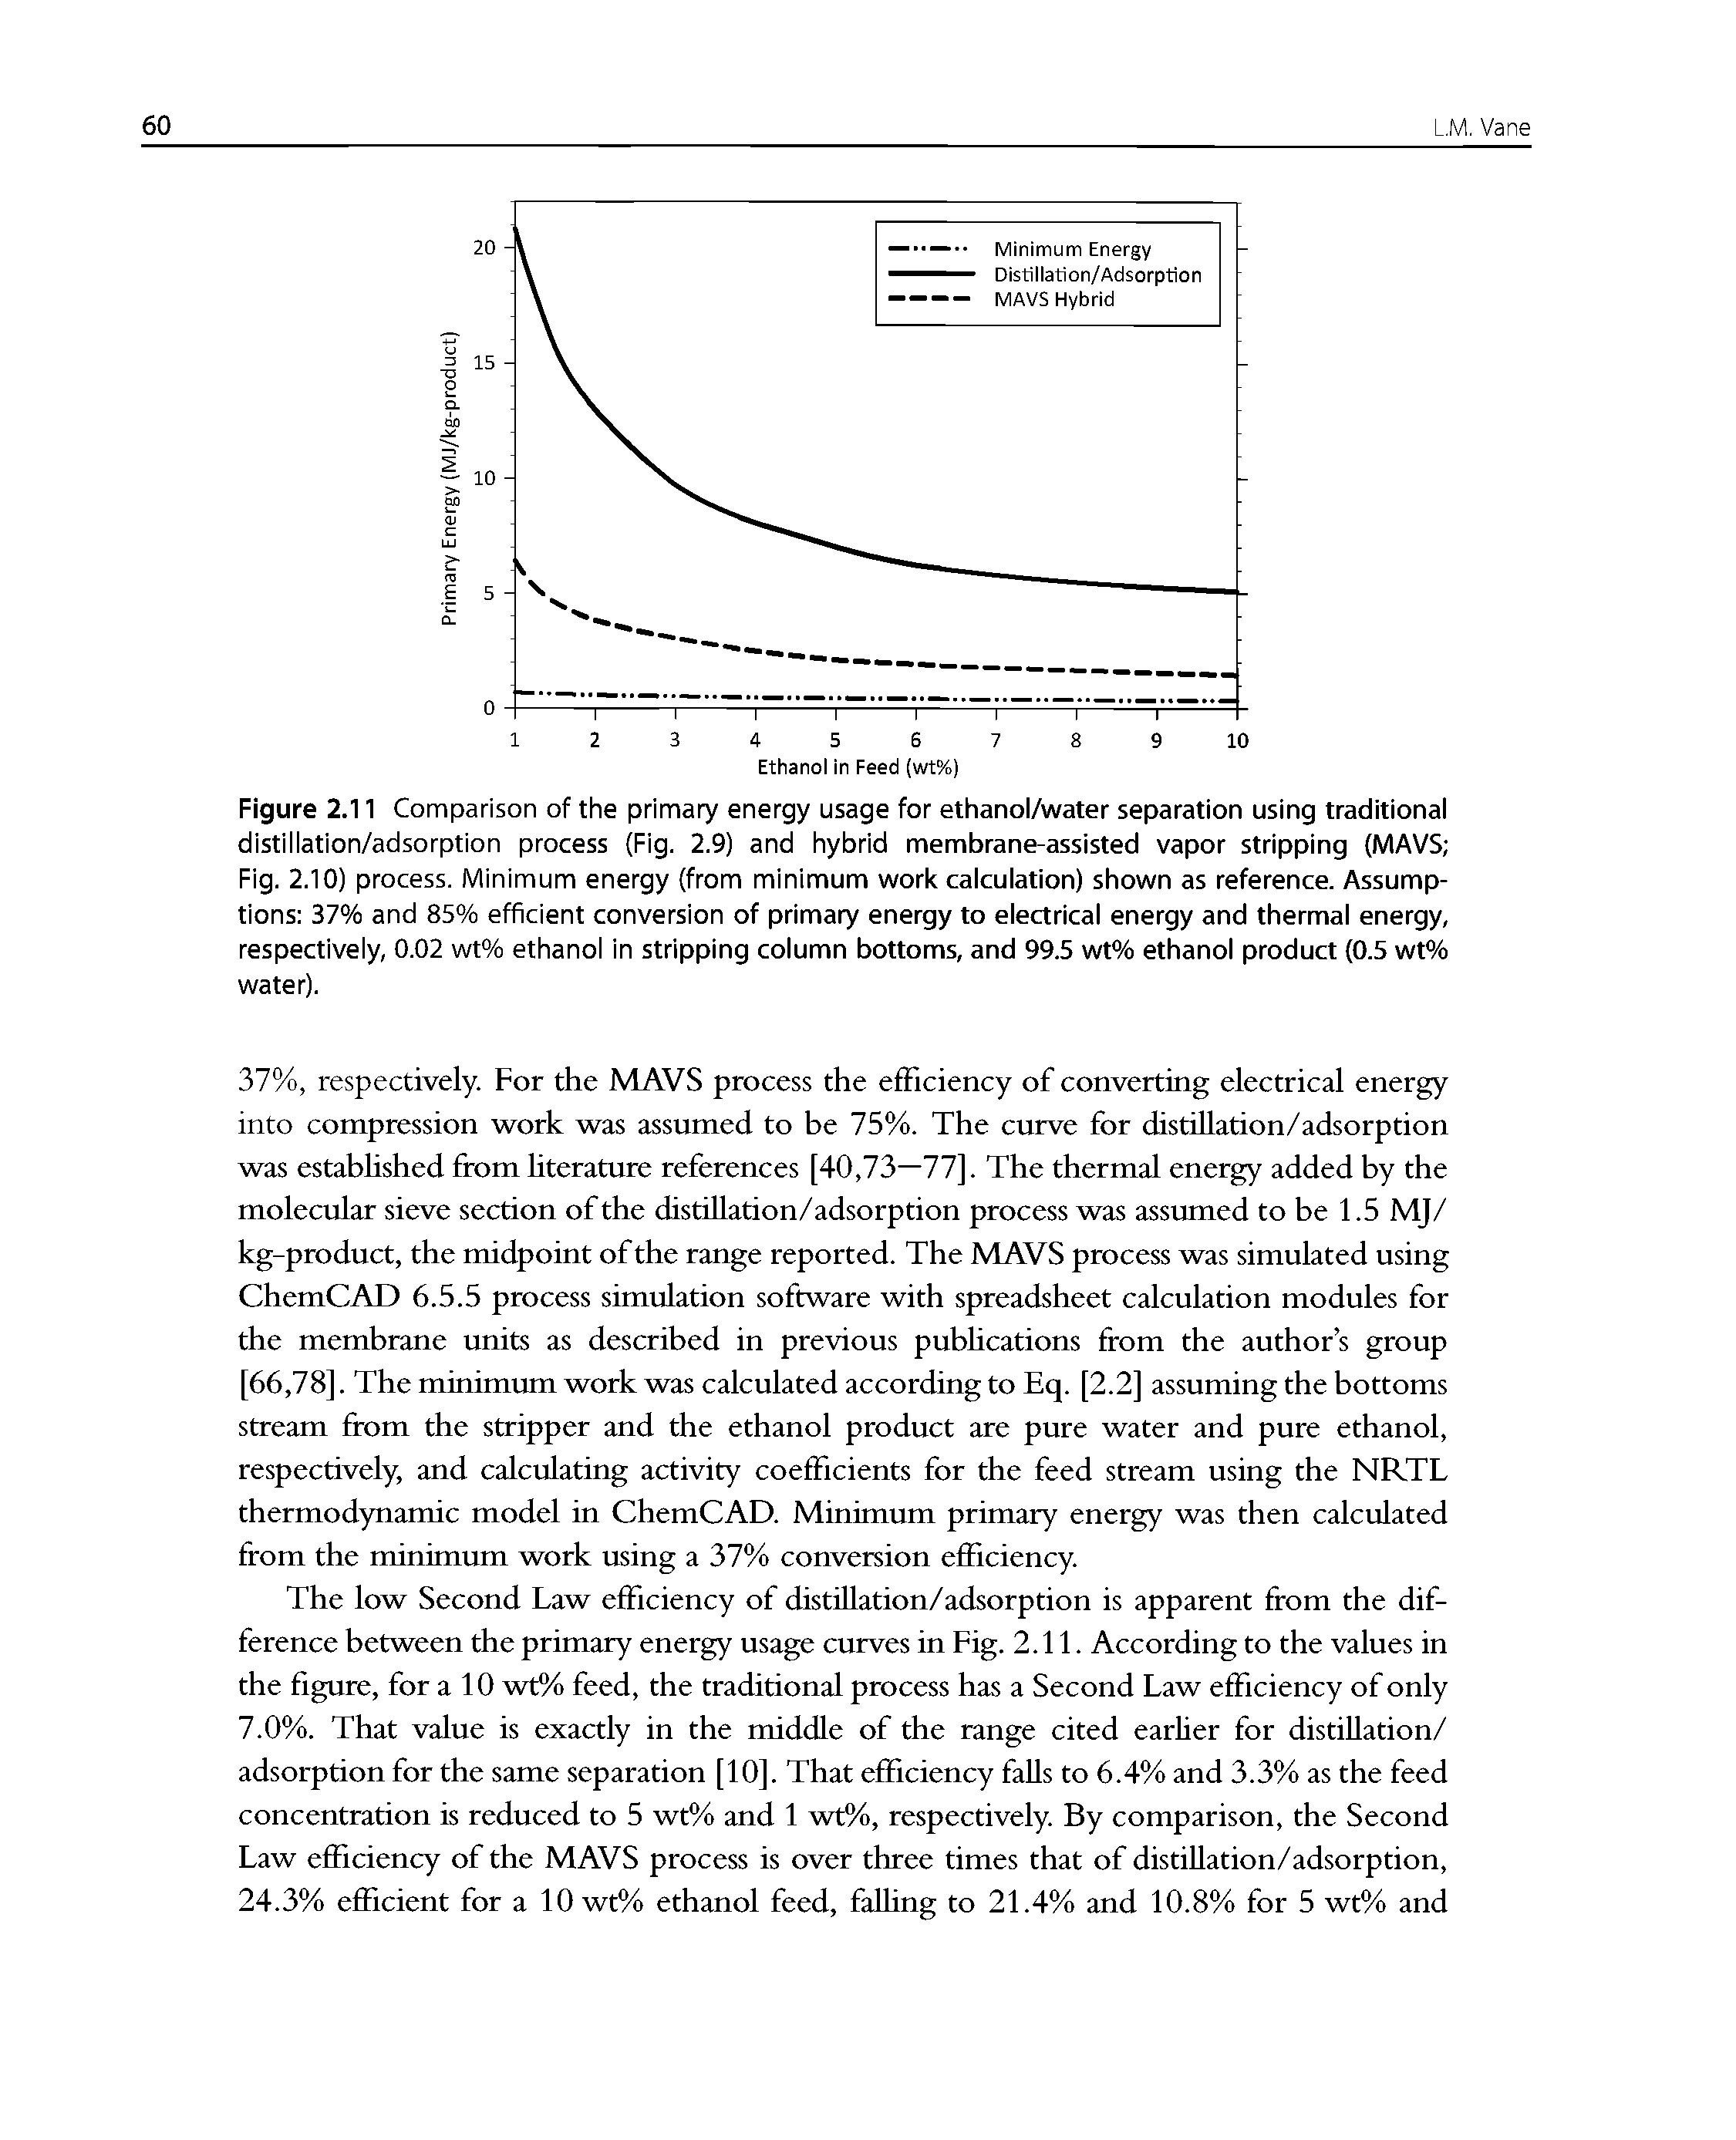 Figure 2.11 Comparison of the primary energy usage for ethanol/water separation using traditionai distillation/adsorption process (Fig. 2.9) and hybrid membrane-assisted vapor stripping (MAVS Fig. 2.10) process. Minimum energy (from minimum work calculation) shown as reference. Assumptions 37% and 85% efficient conversion of primary energy to electrical energy and thermal energy, respectively, 0.02 wt% ethanol in stripping column bottoms, and 99.5 wt% ethanol product (0.5 wt% water).